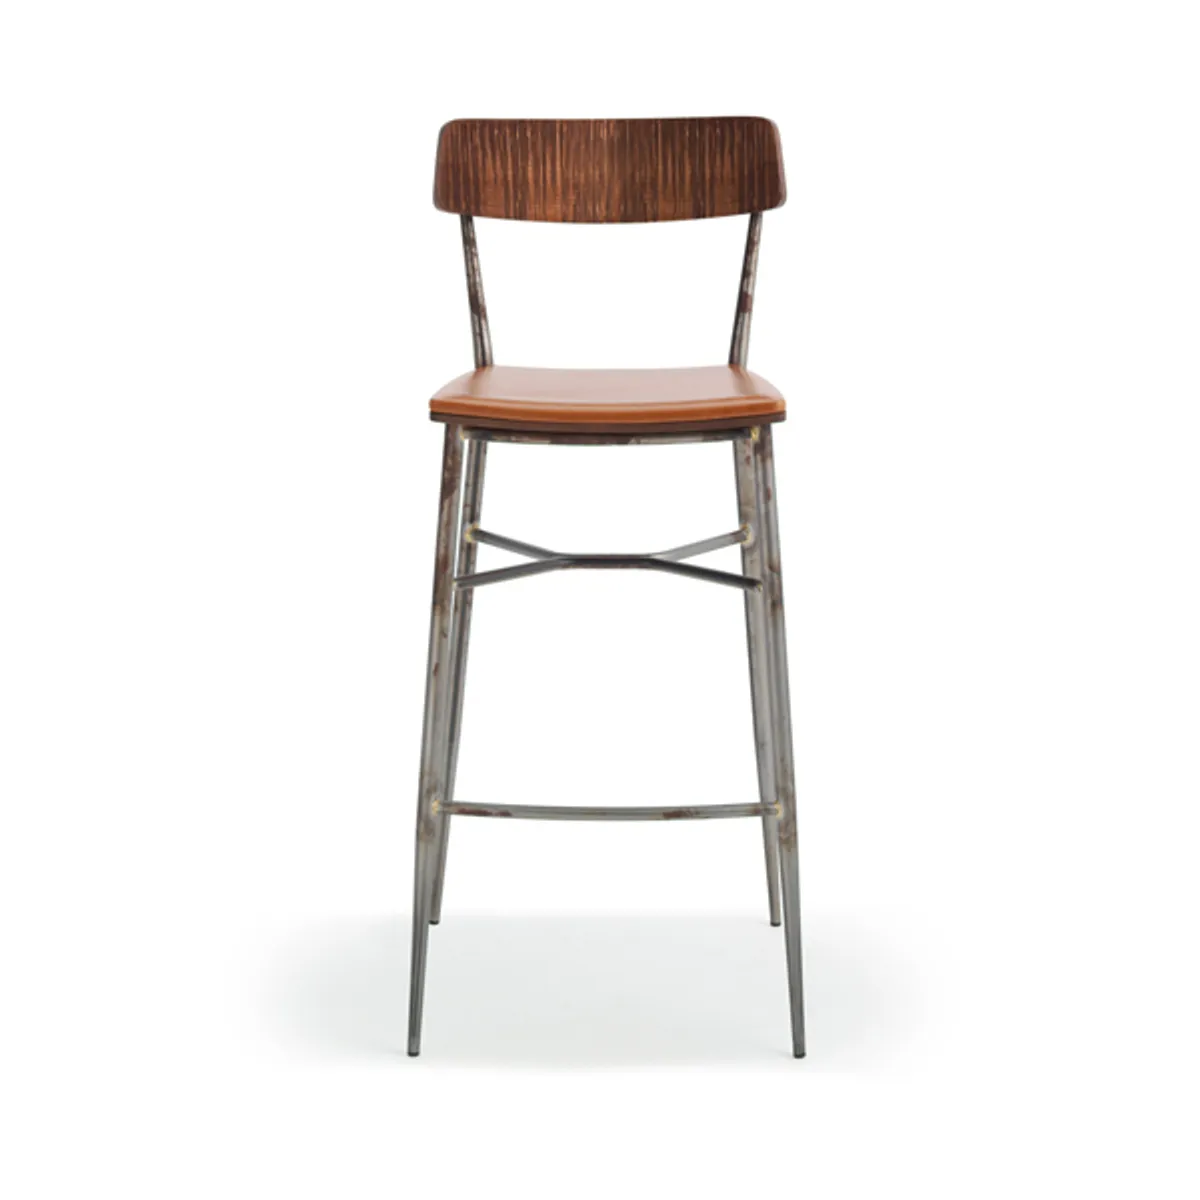 Agatha 2 Barstool Transparent Frame Inside Out Contracts